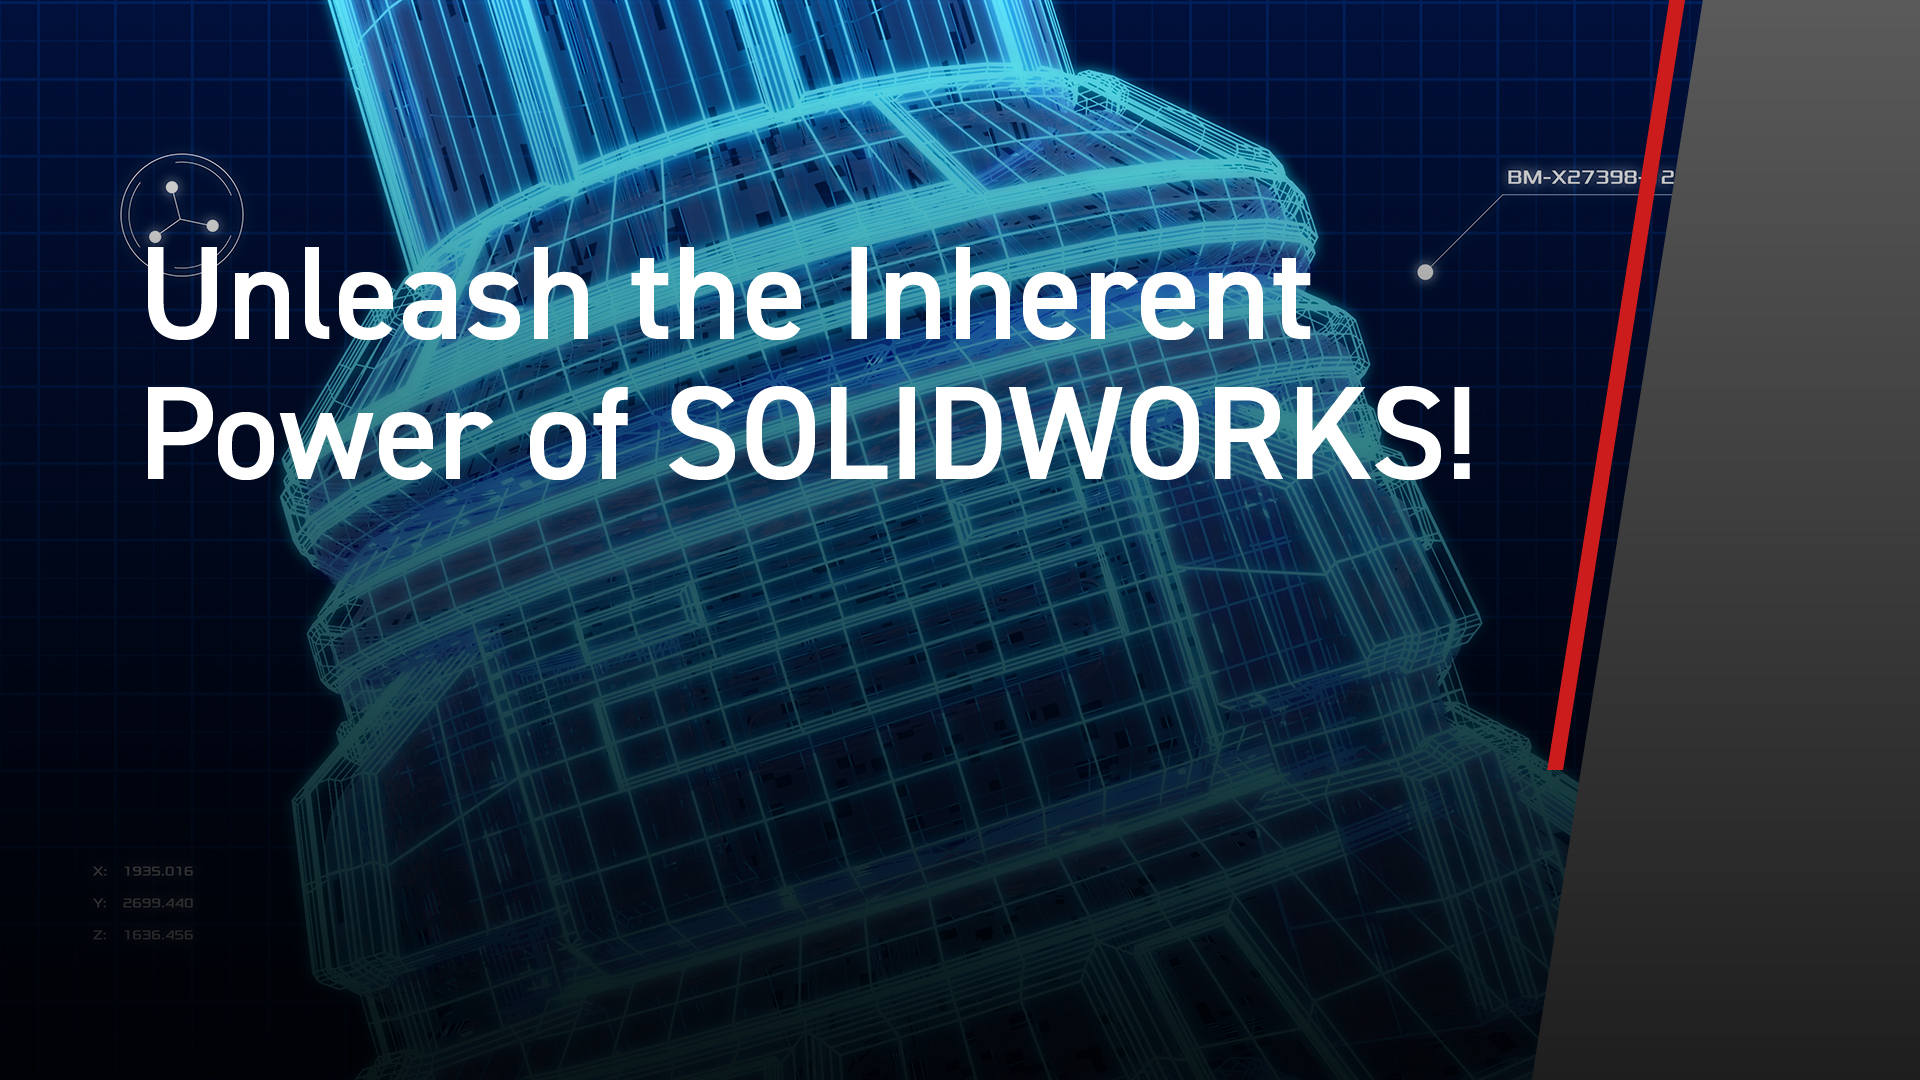 Unleash the Inherent Power of SOLIDWORKS!